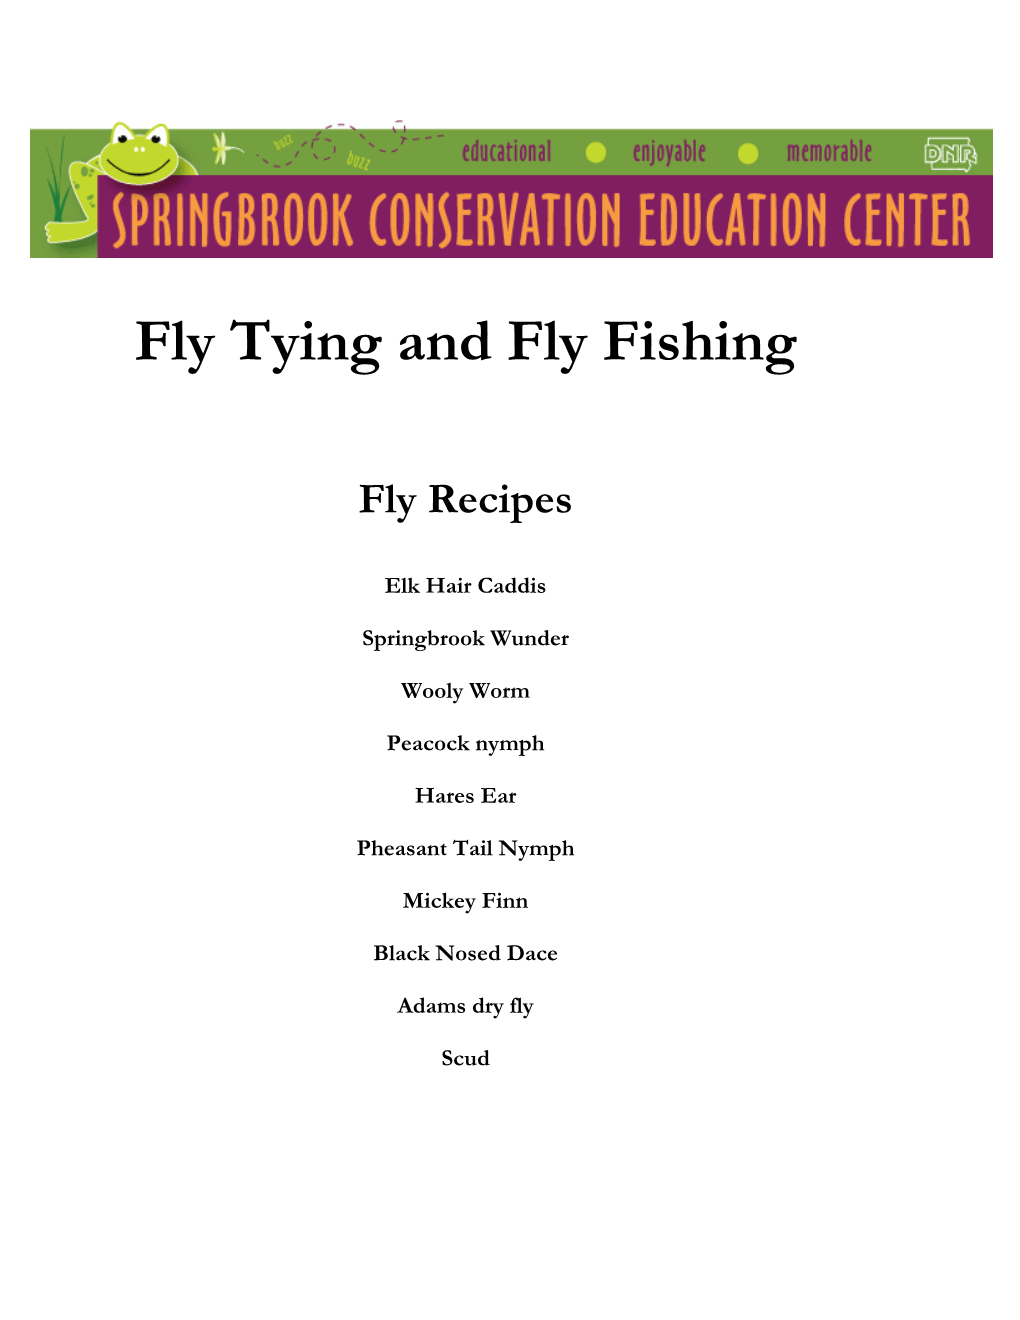 Fly Tying and Fly Fishing